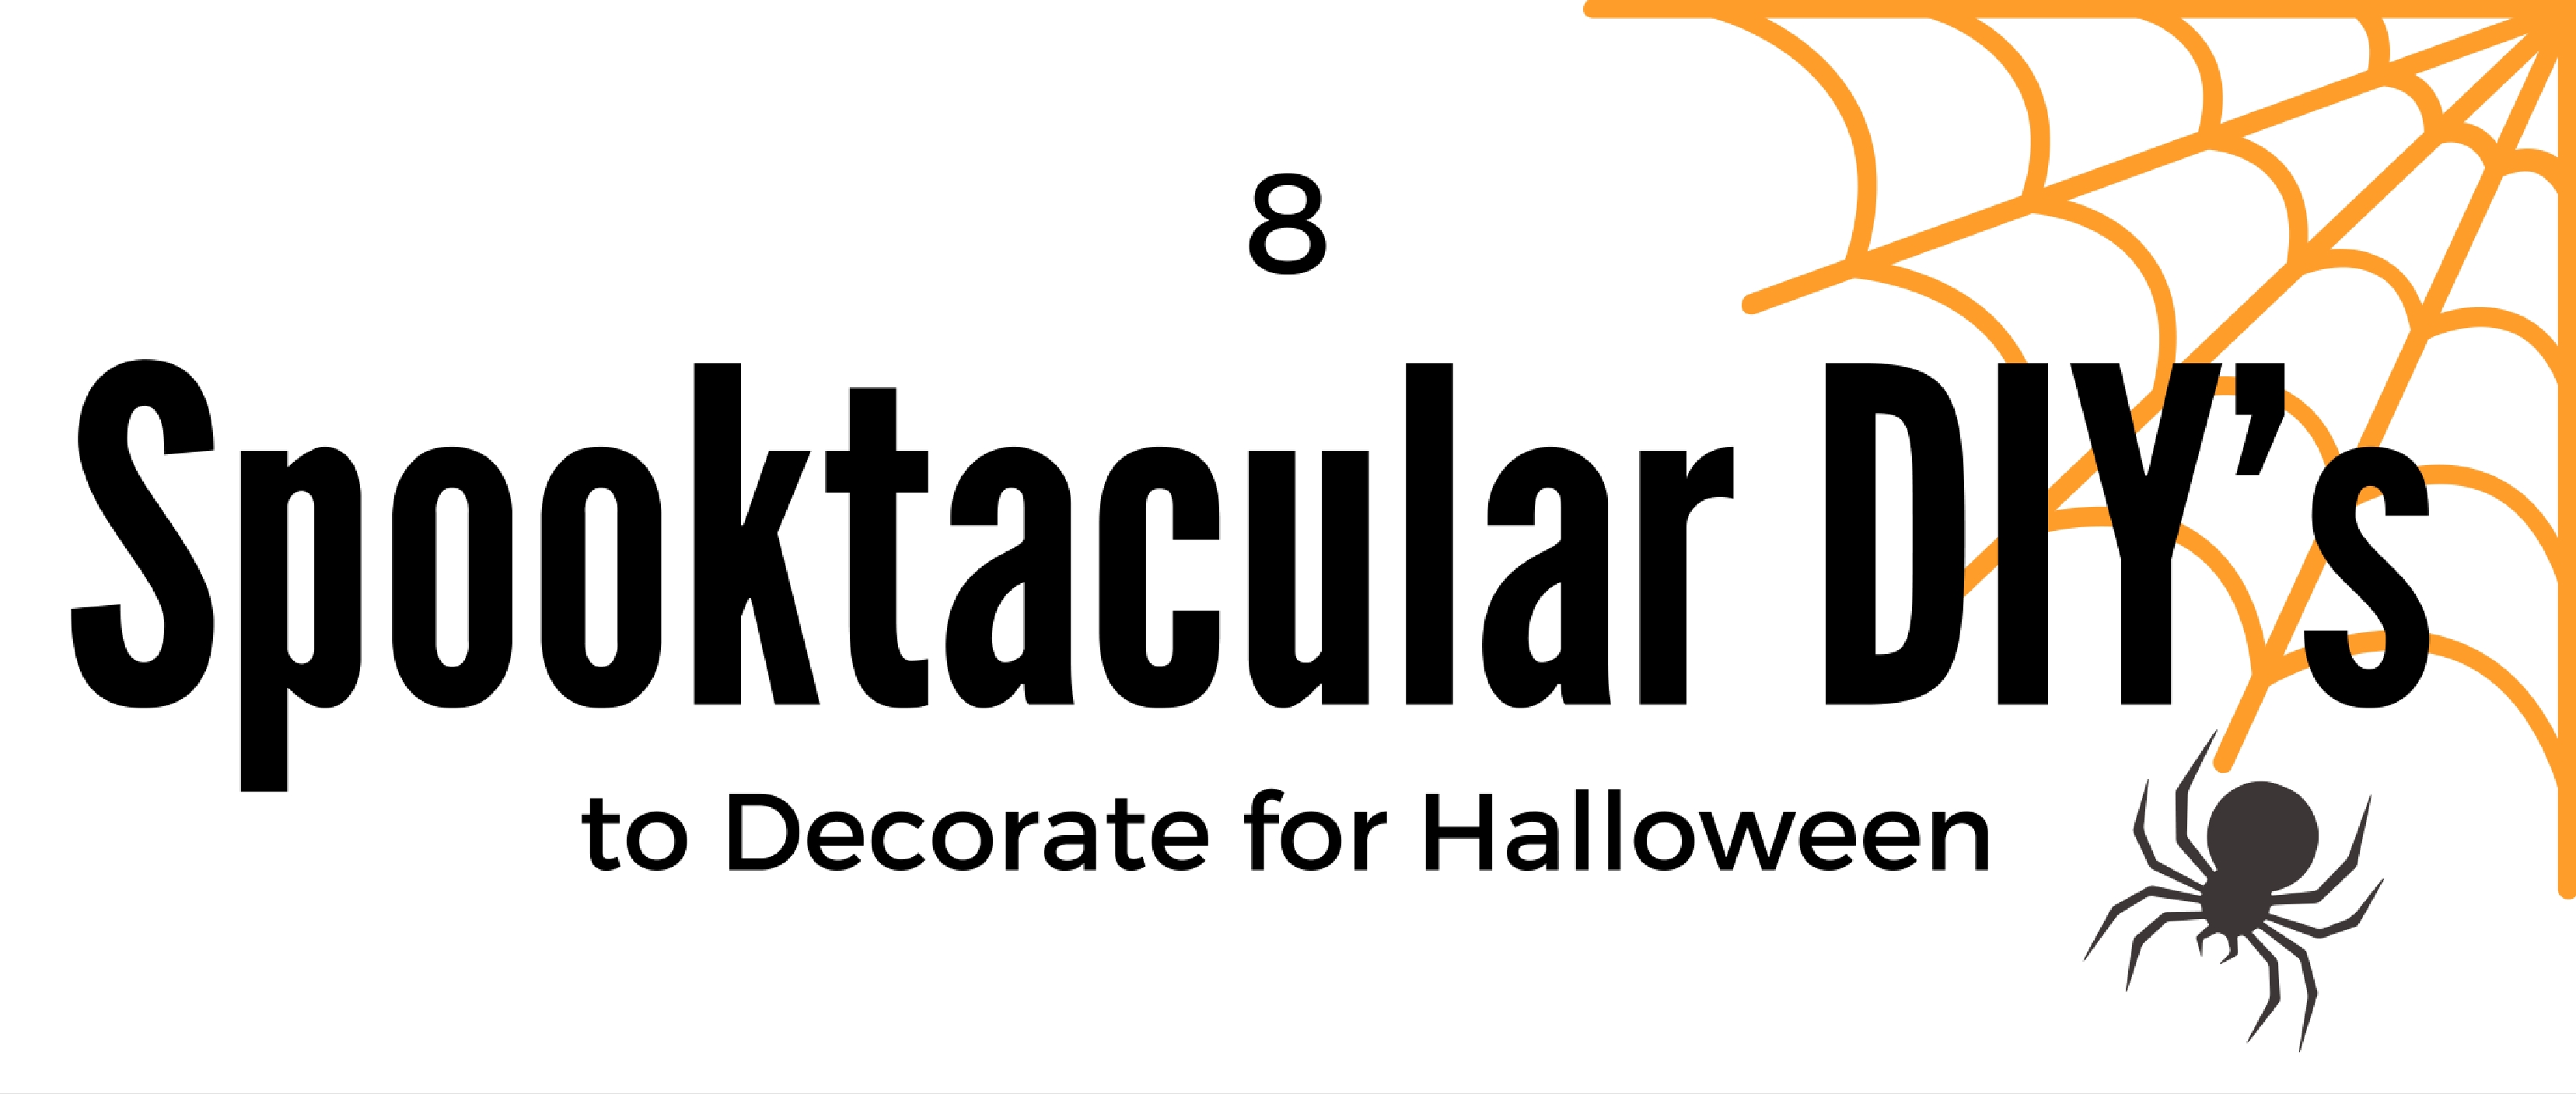 8 Spooktacular DIY’s to Decorate for Halloween